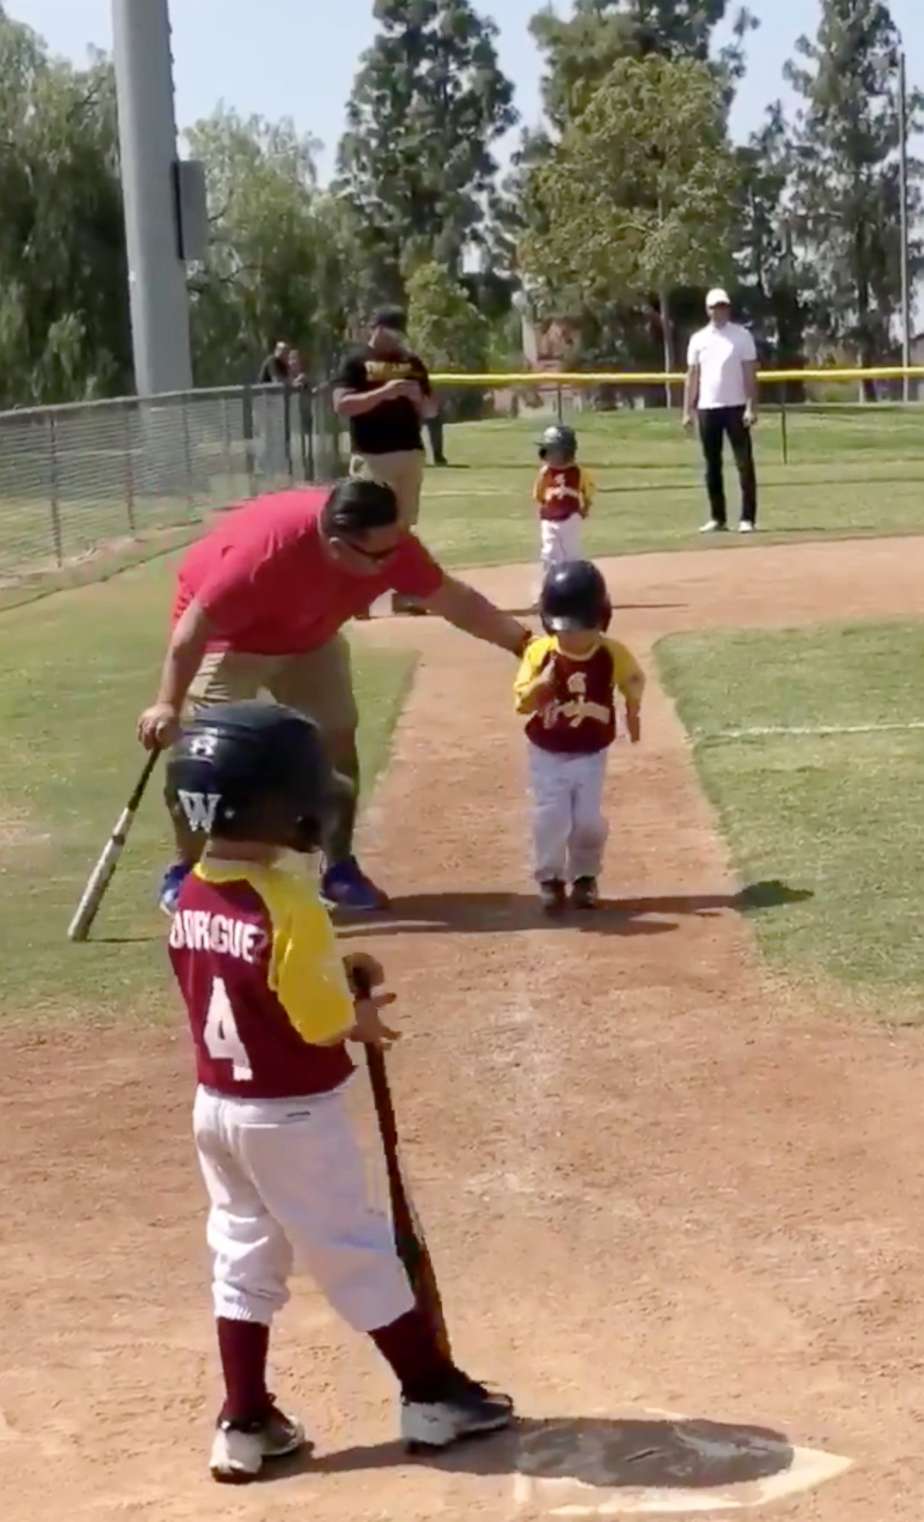 PHOTO: 3-year-old Lennox Salcedo was told to "run home as fast as he can" during a baseball game. He delivered the performance of a lifetime.